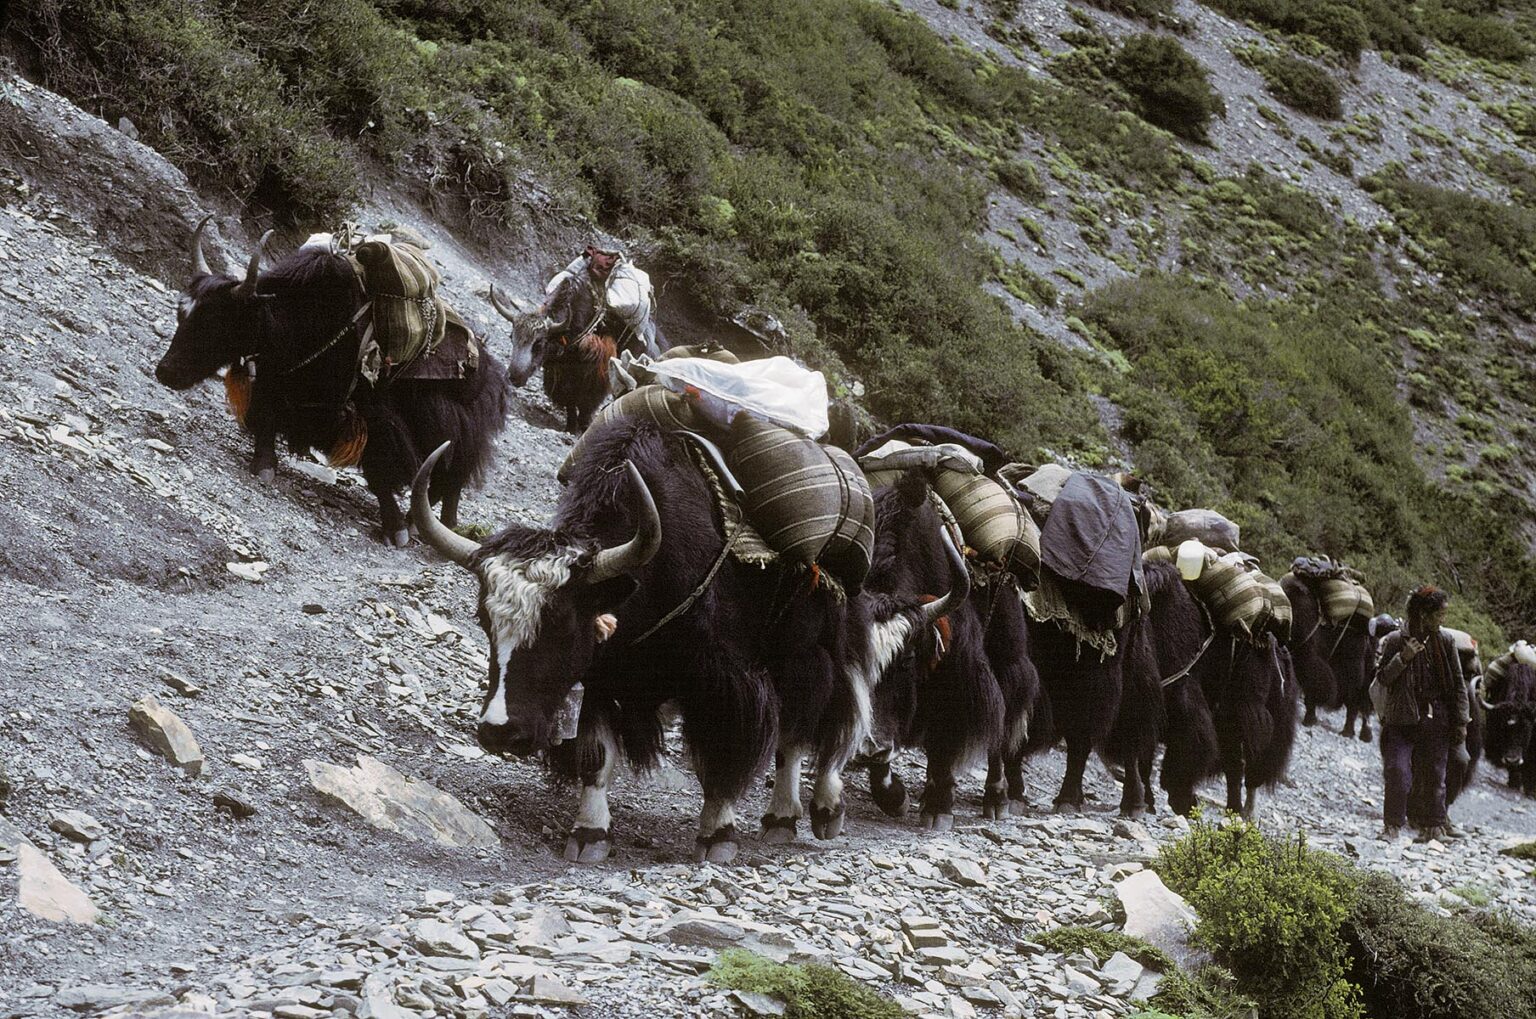 NOMADIC YAK HERDERS guide a YAK CARAVAN laden with cargo up a Himalayan Valley - DOLPO, NEPAL